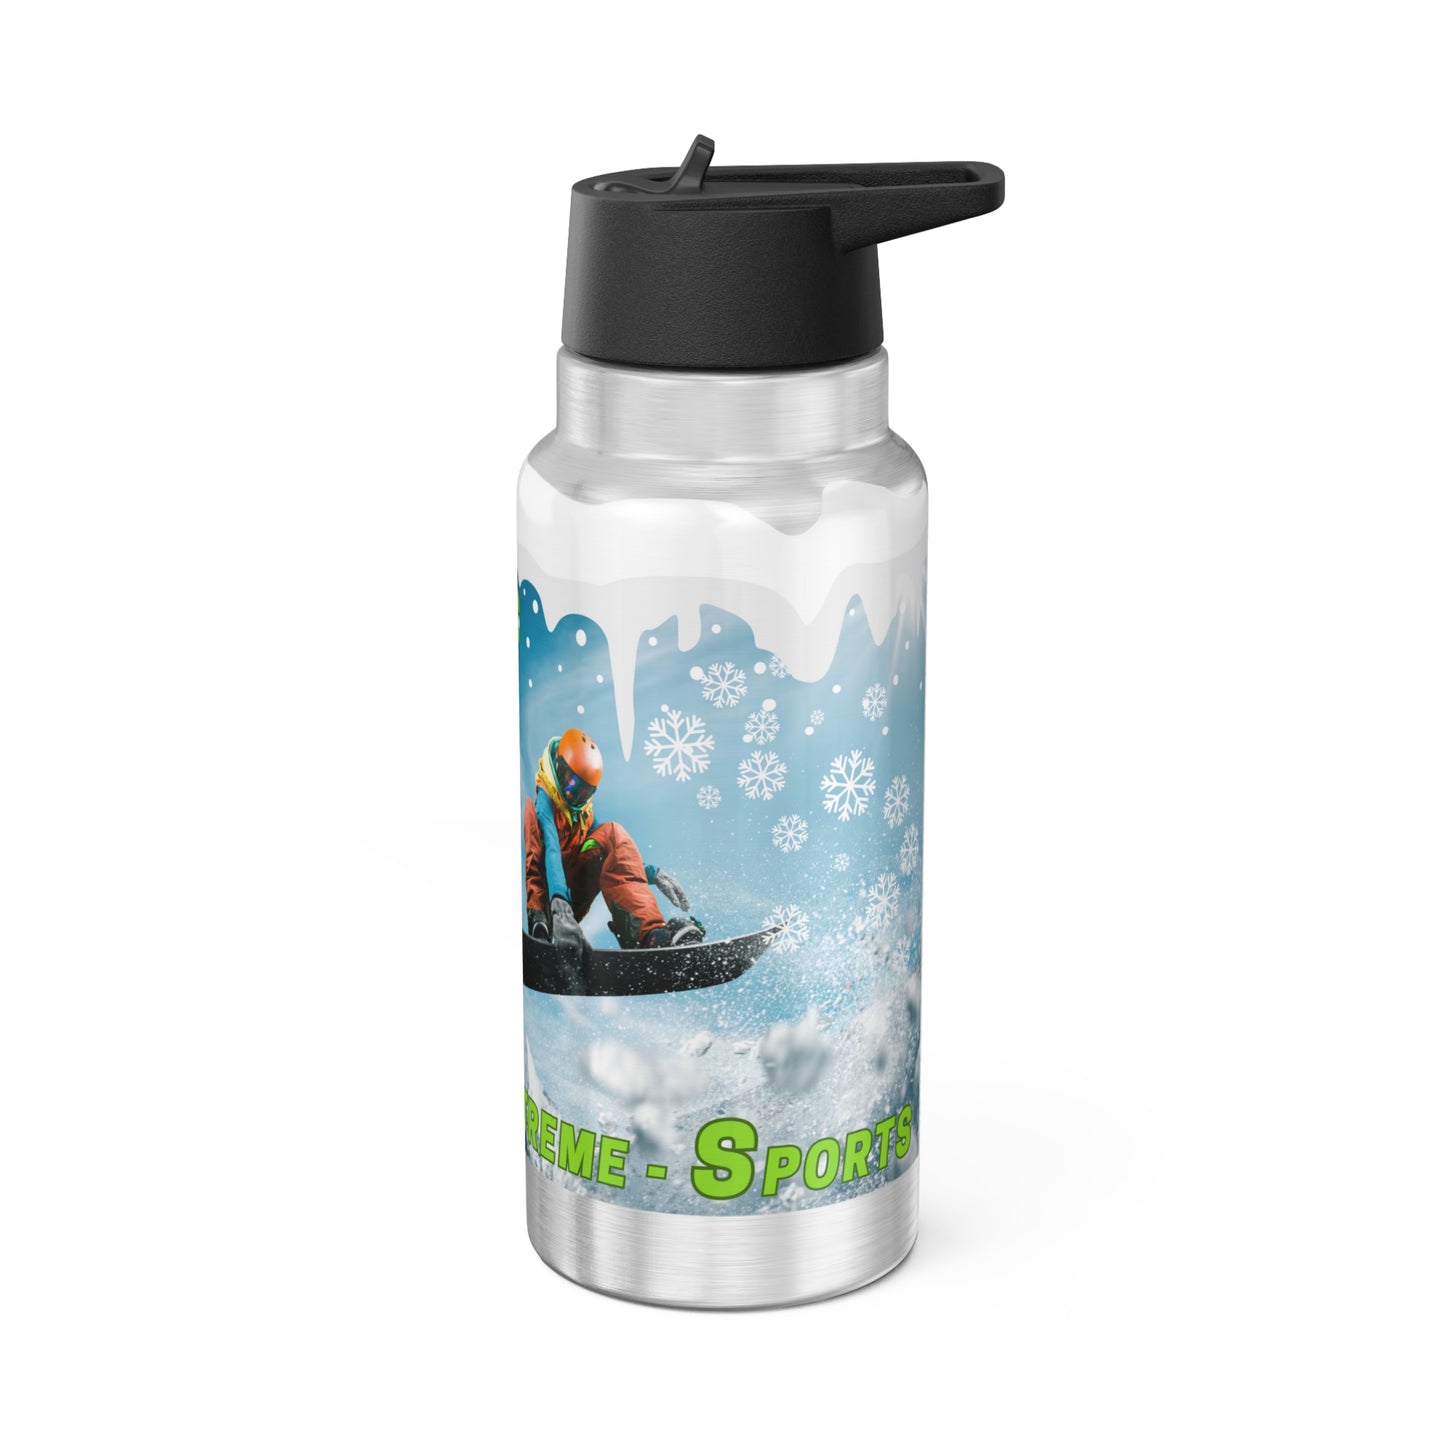 Water Bottle or Favourite Beverage, Snowboarding Xtreme Sports 32oz